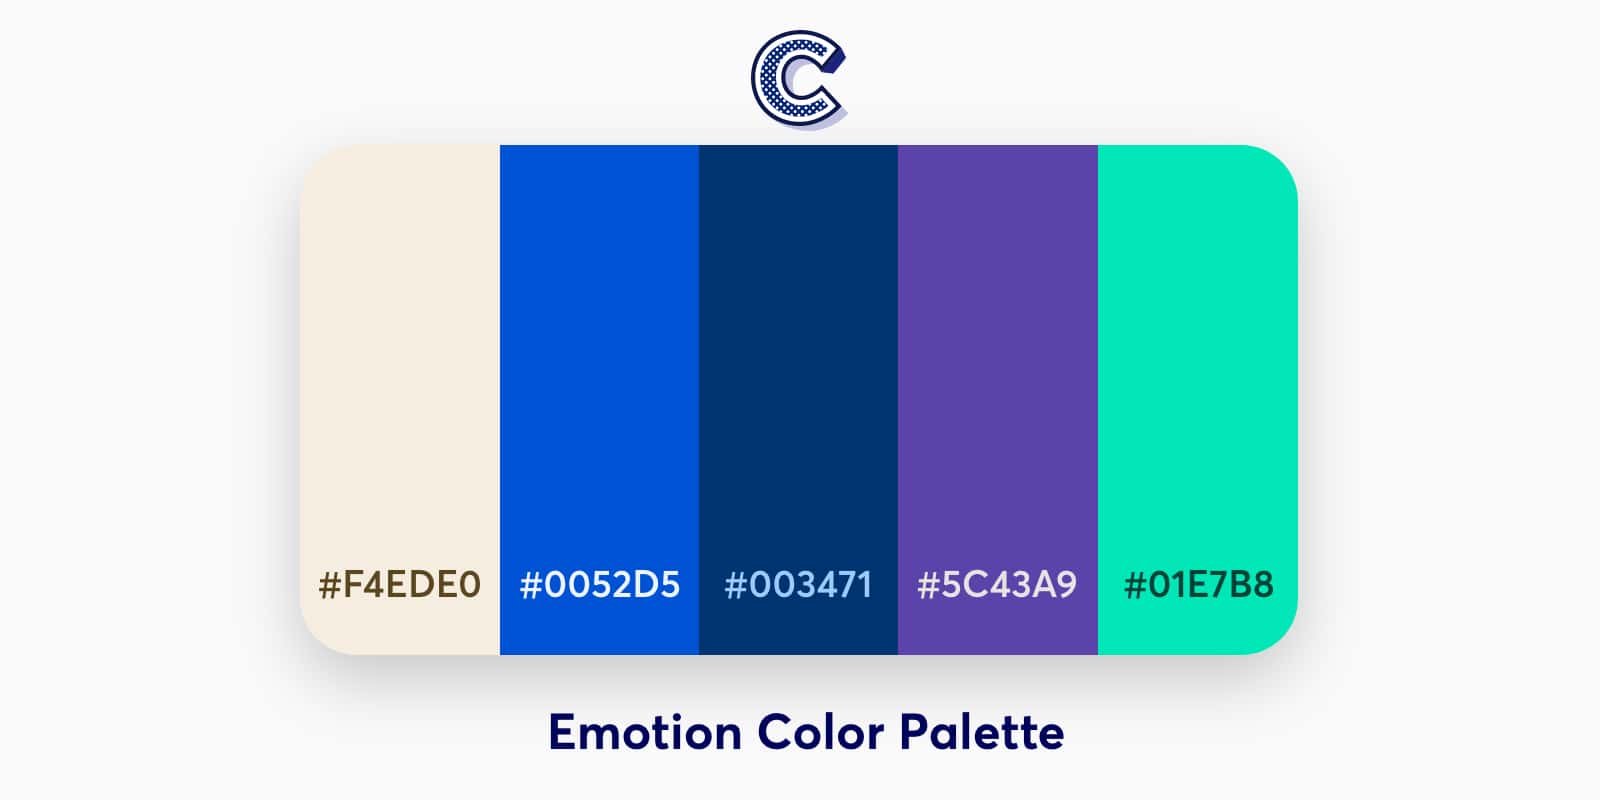 the featured image of emotion color palette